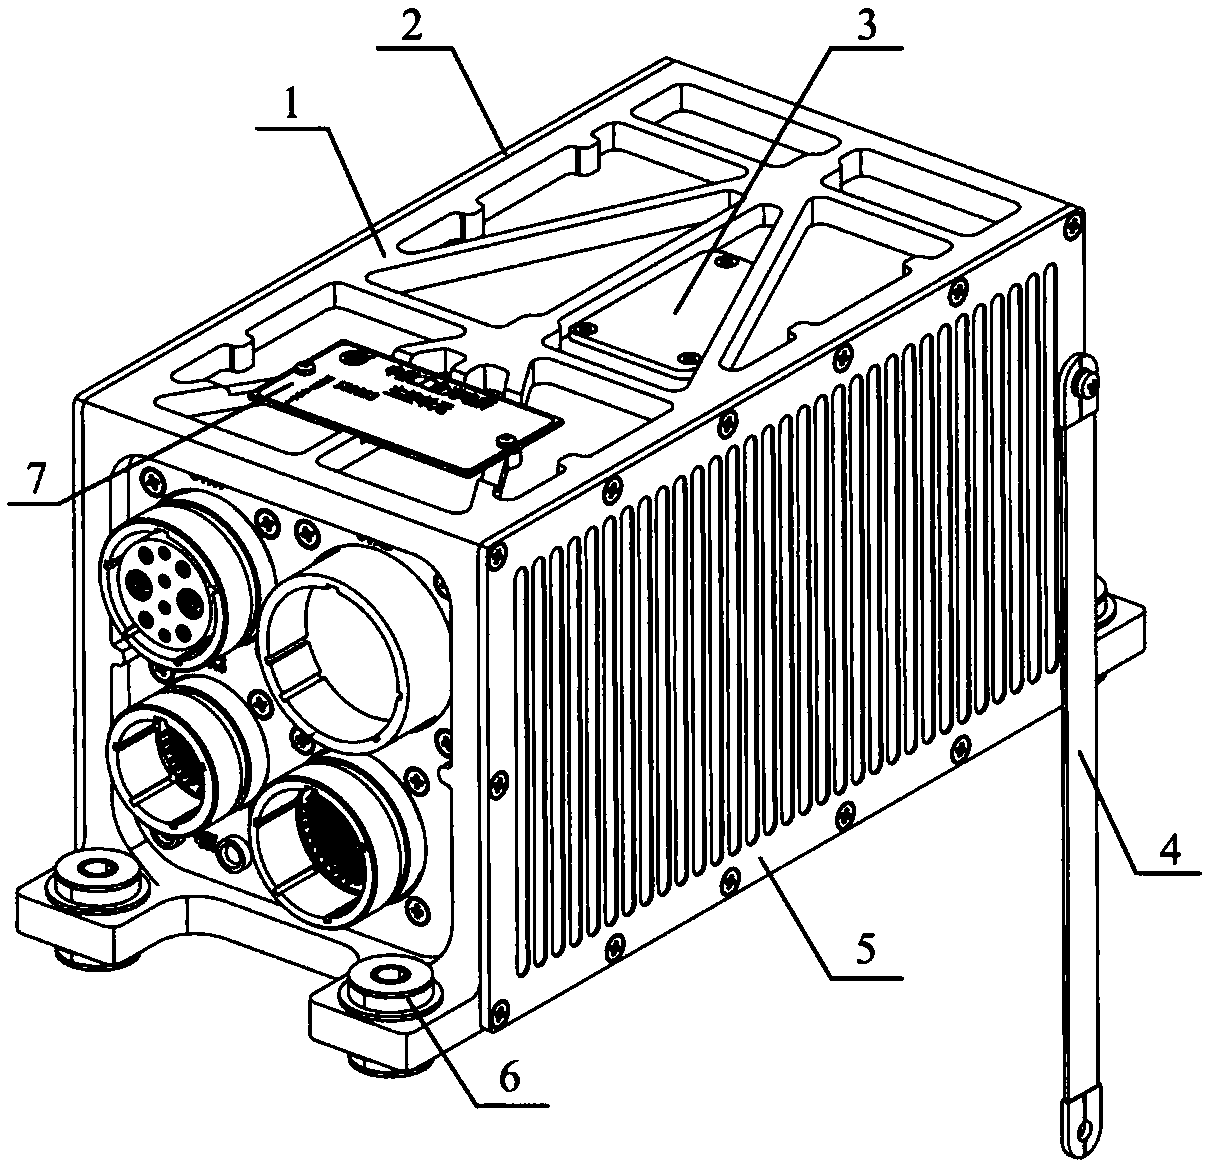 An avionics case with internal module stack structure form connection